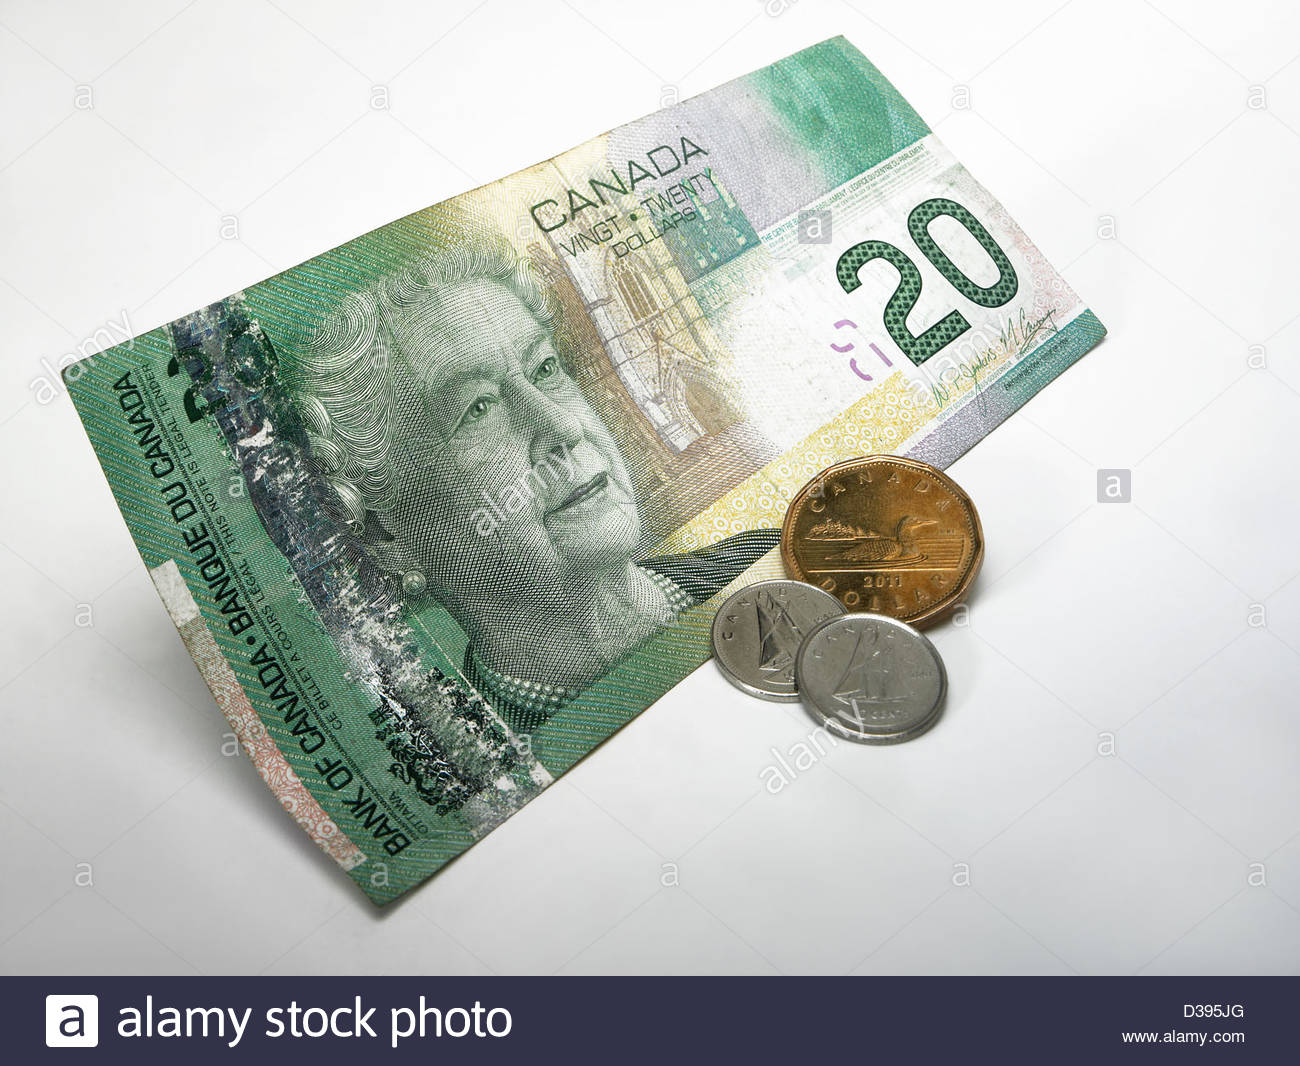 3 Coins High Resolution Stock Photography And Images Alamy